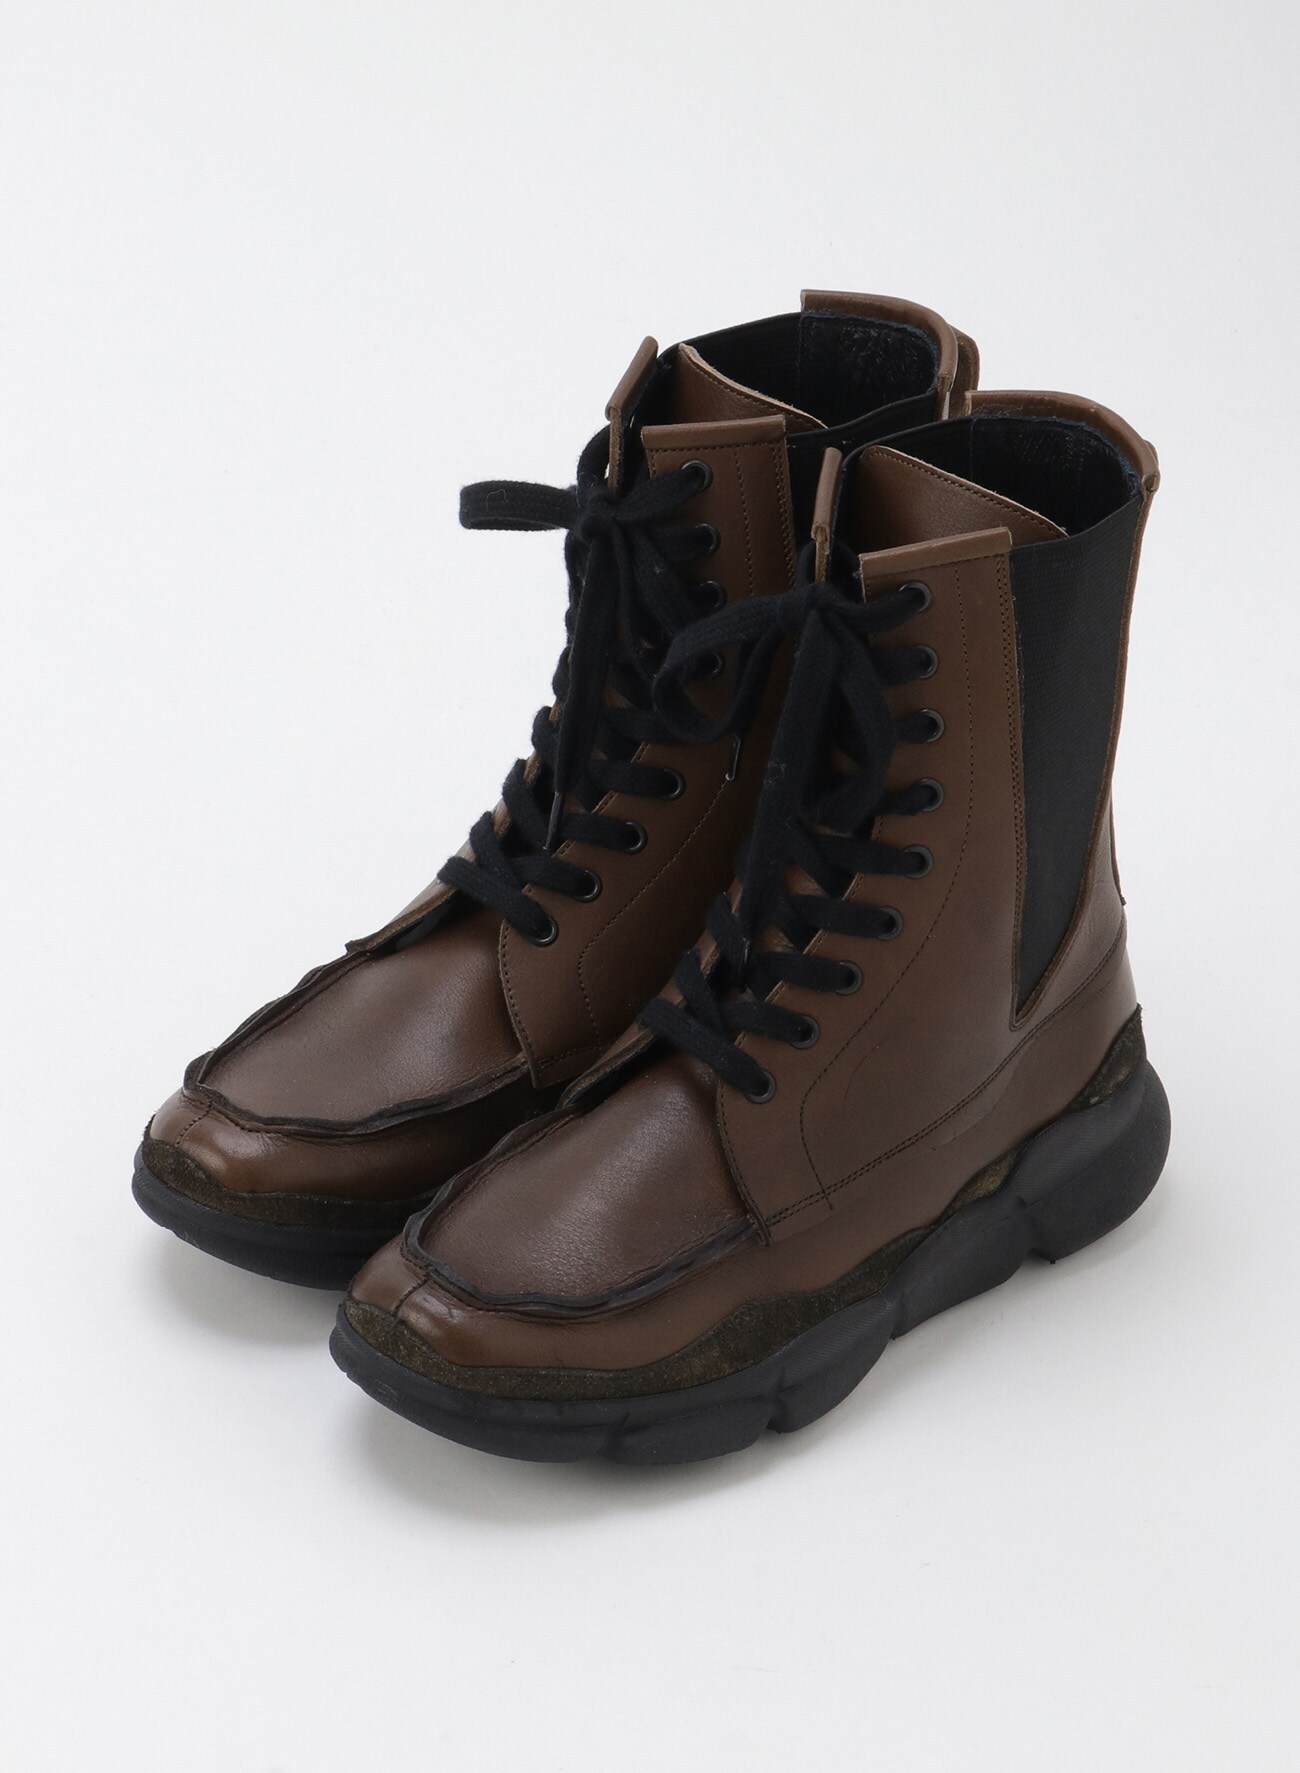 MATTE LEATHER COMBI MOCHA GORE KNITTED BOOTS